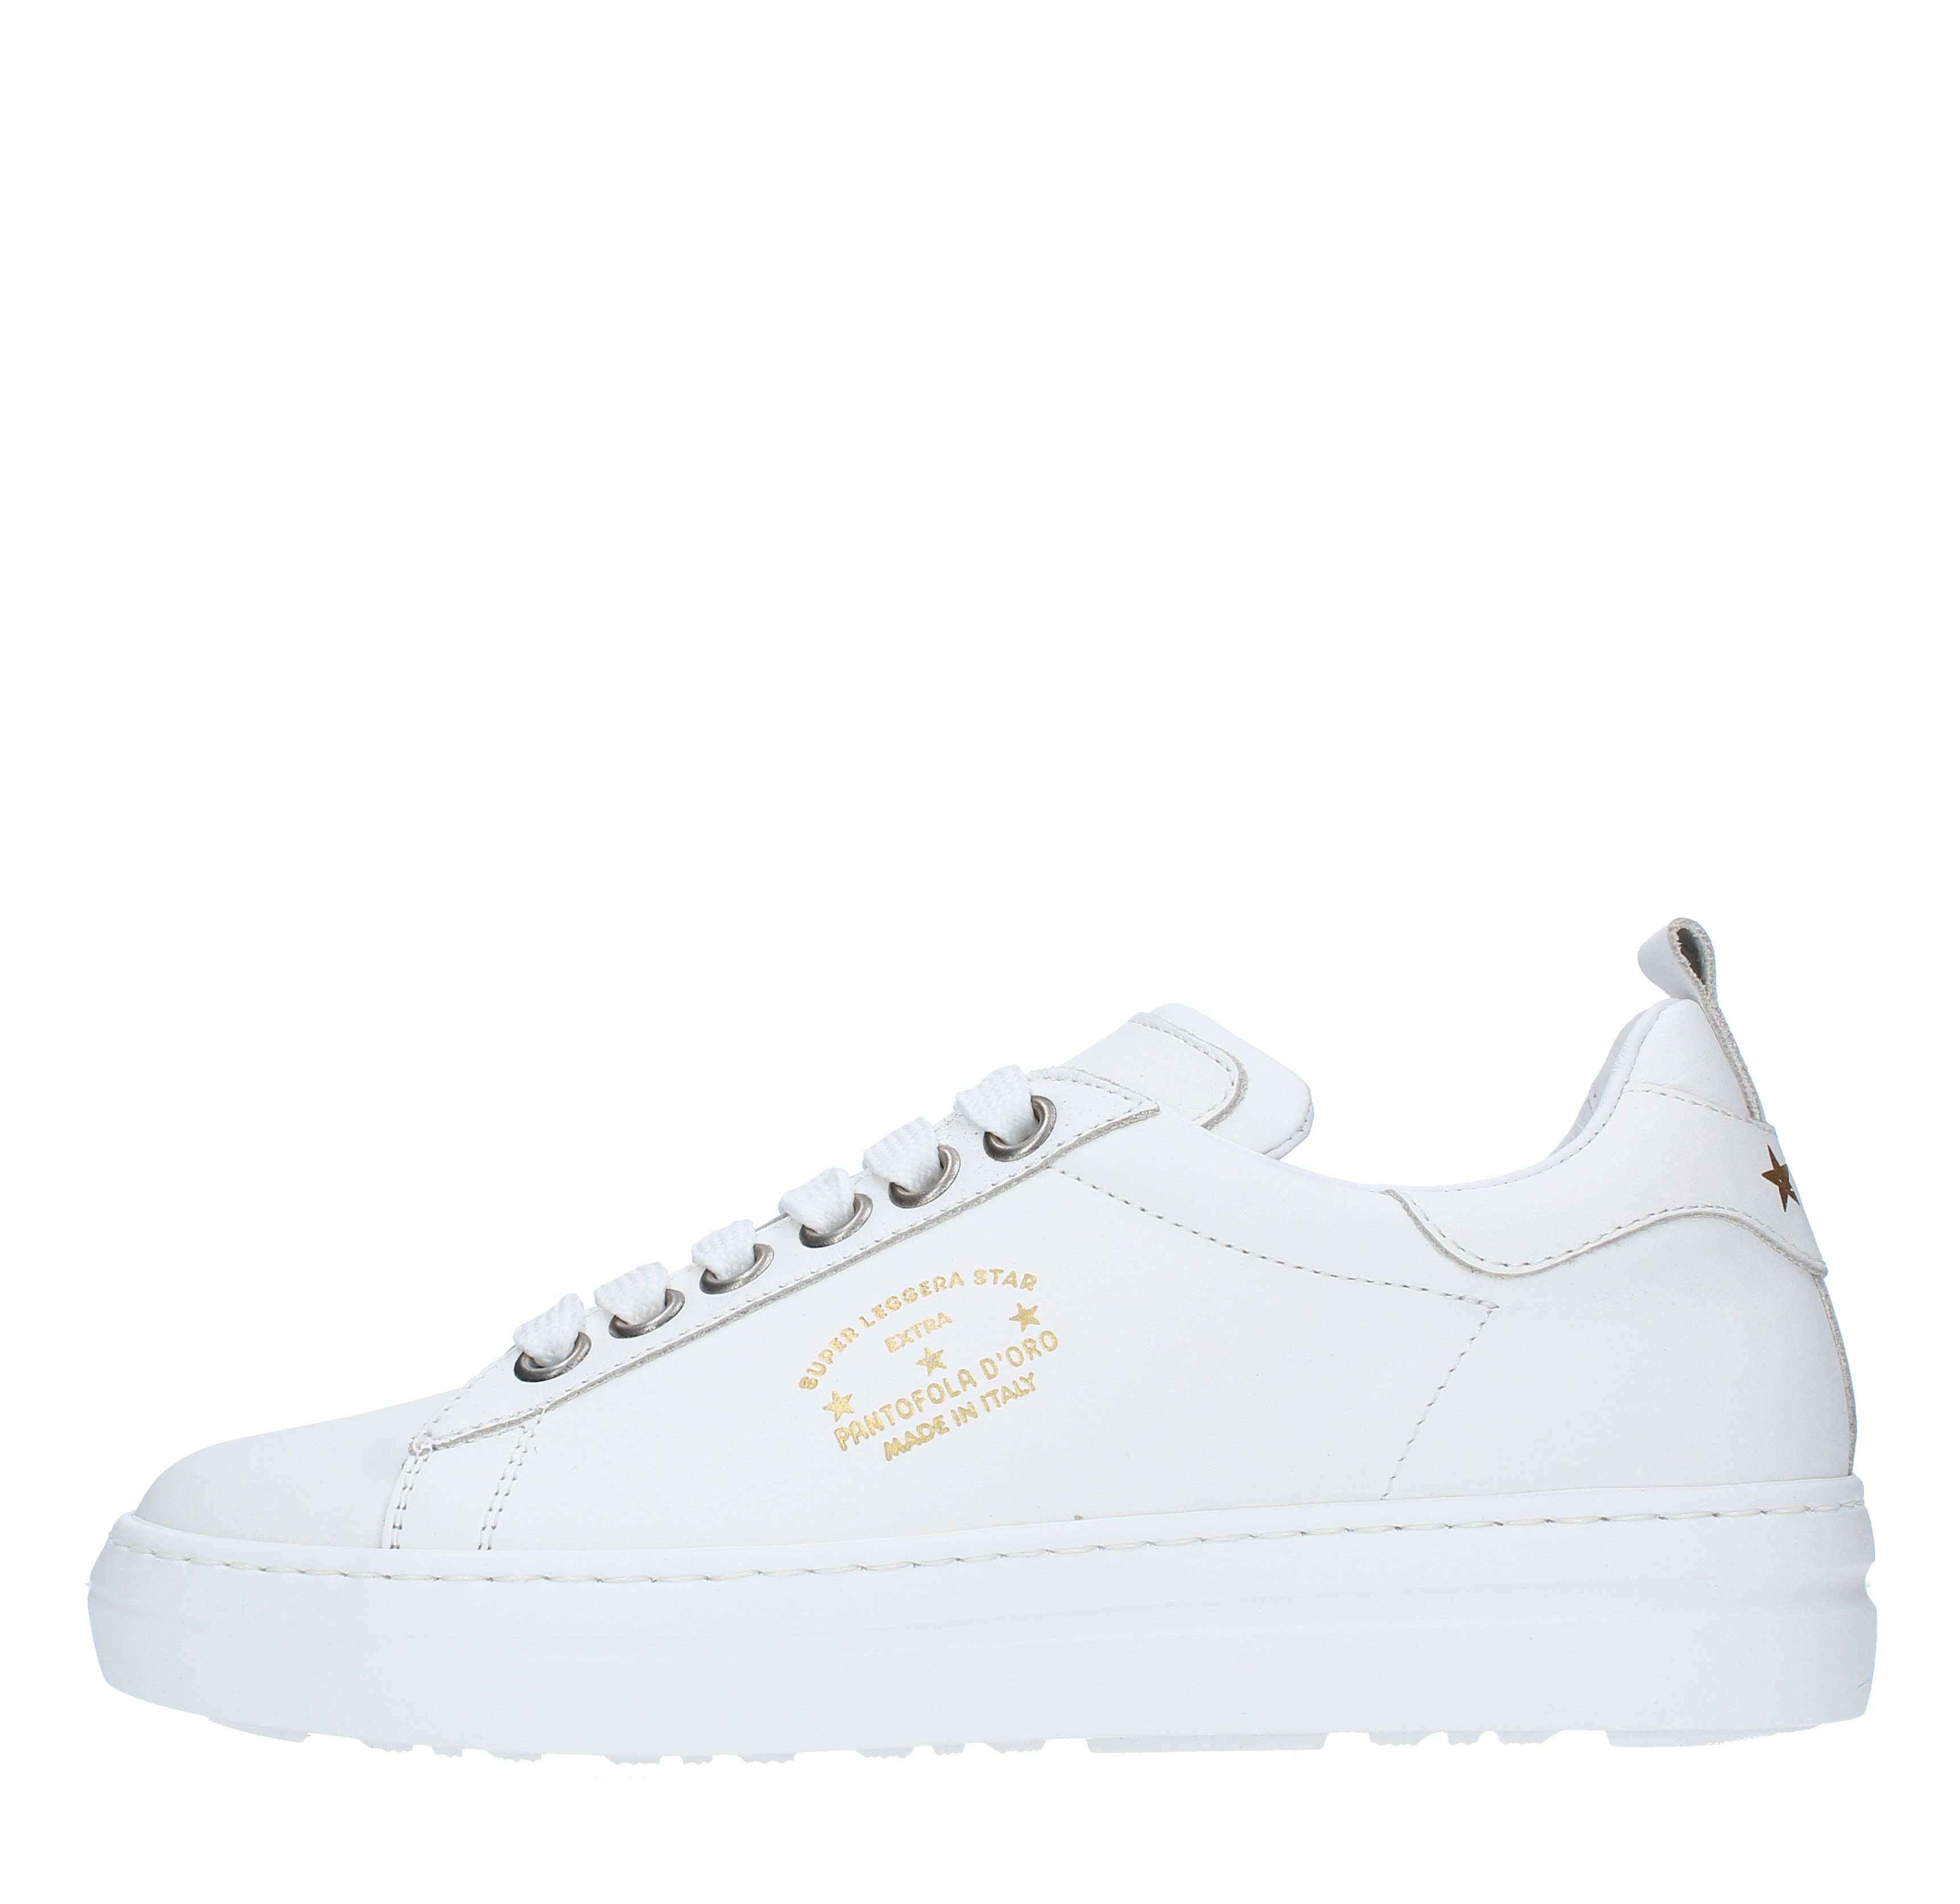 Leather sneakers - PANTOFOLA D'ORO - Ginevra calzature